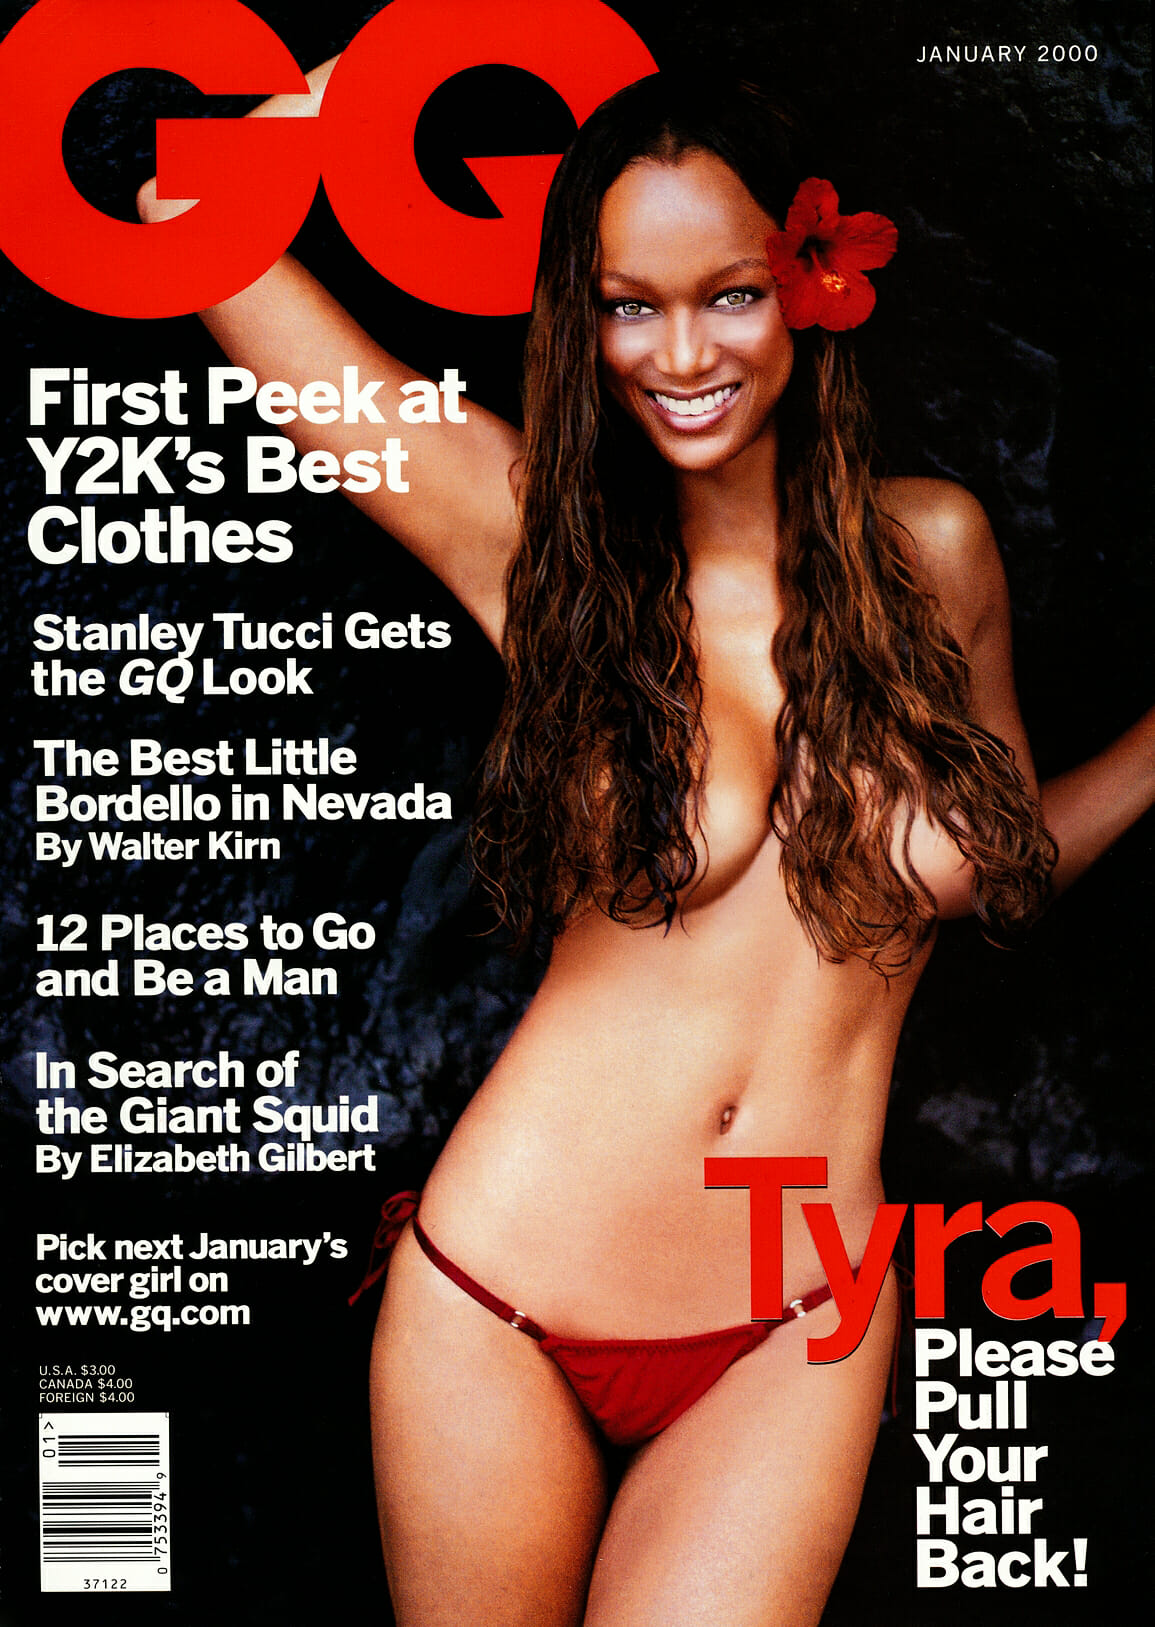 Banks tyra pictures naked of 